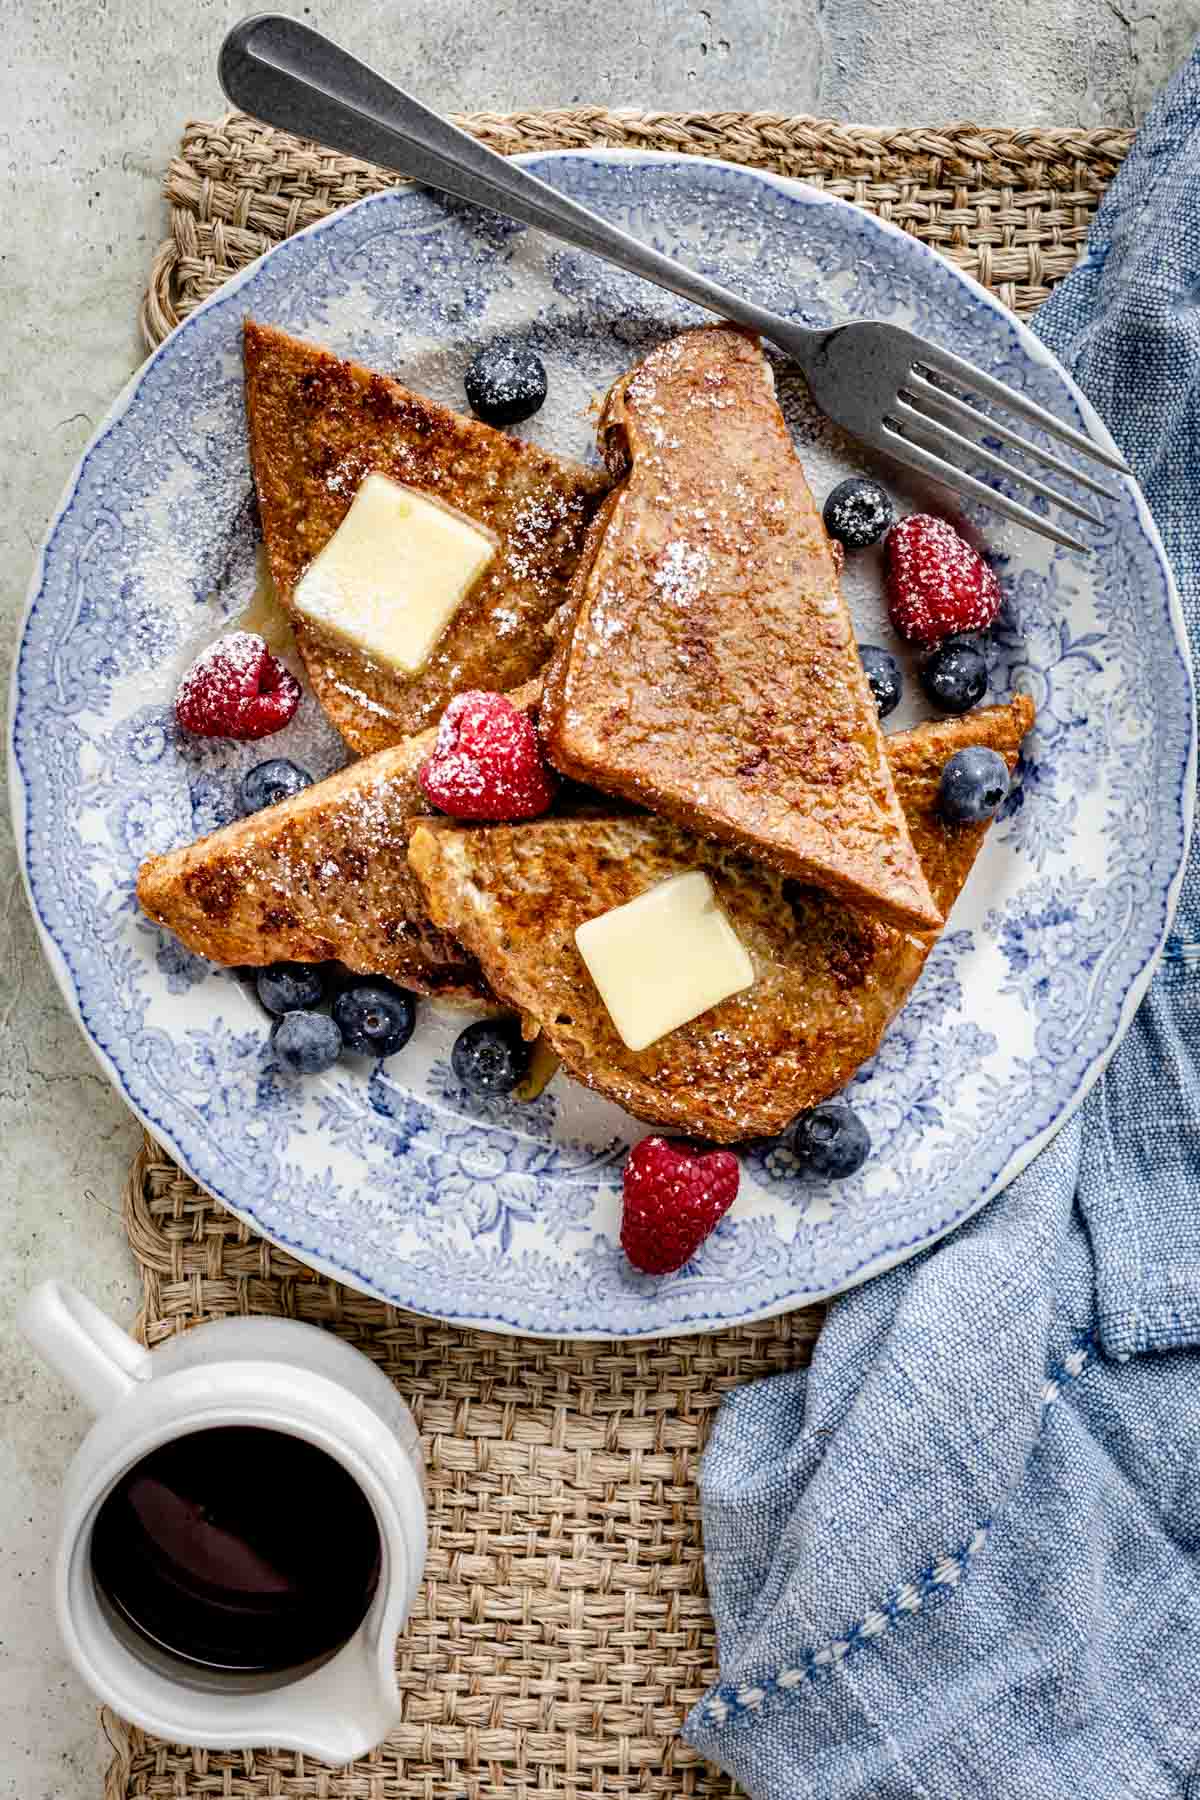 wheat bread french toast cut into triangles on a plate served with fruit, maple syrup, and pats of butter.